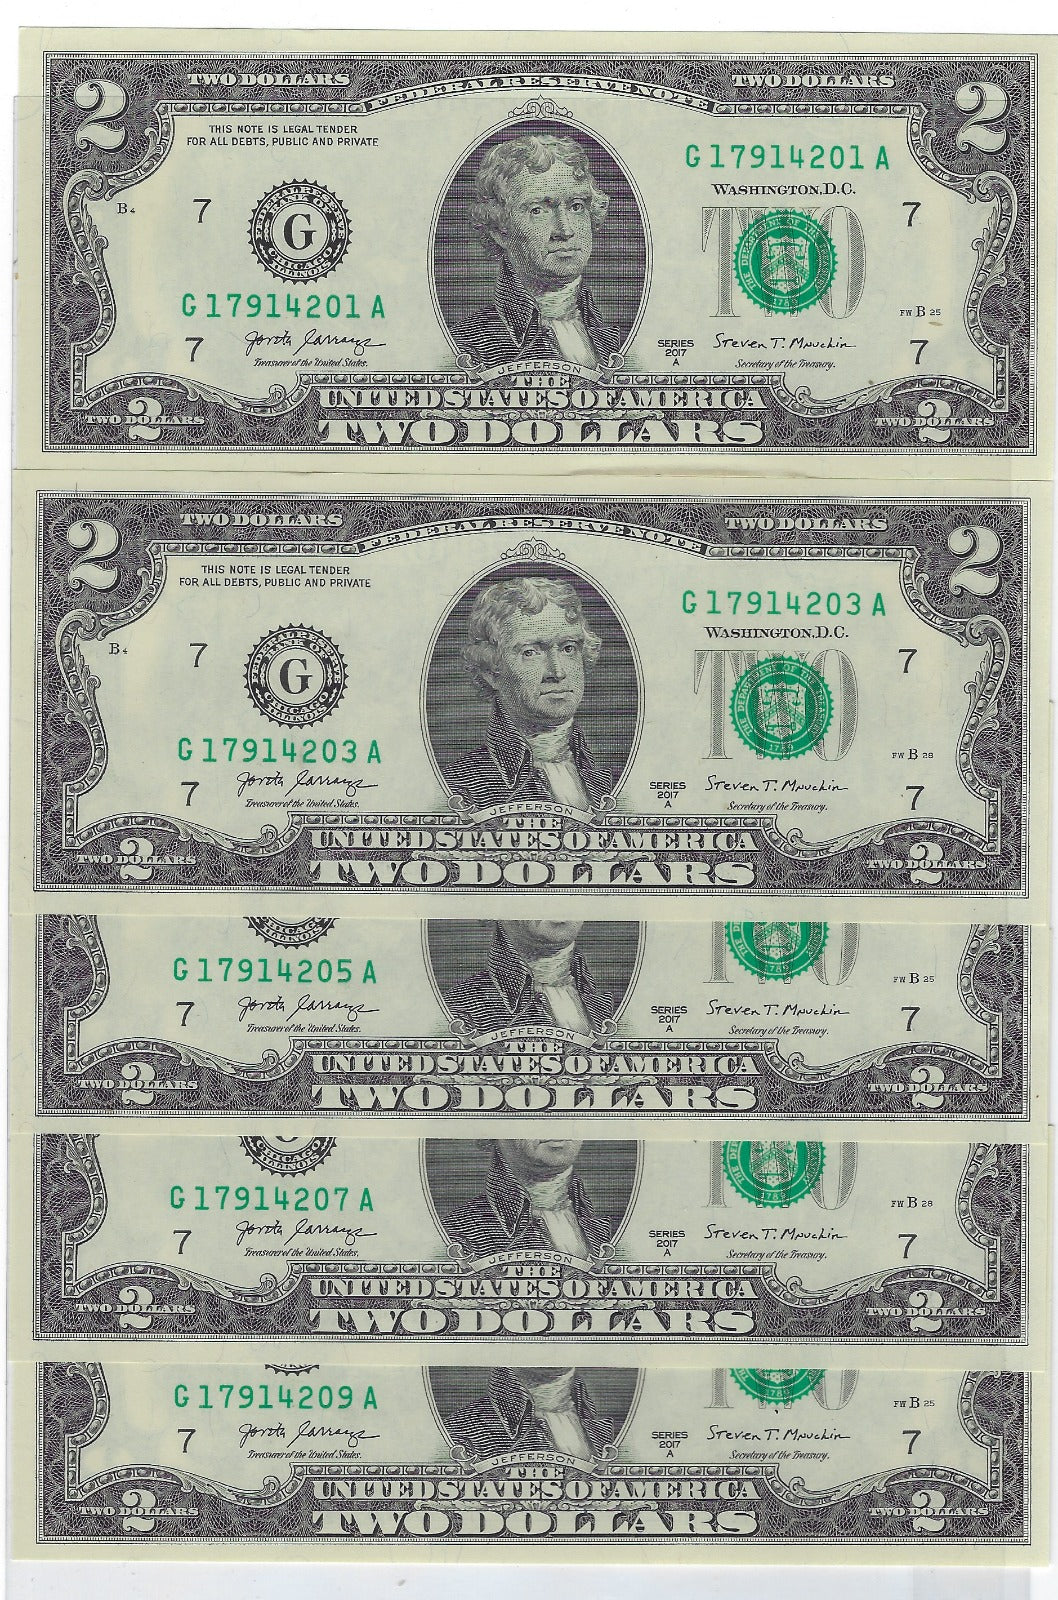 US$2 FRN Chicago 7G Fancy SN x 5 Odd SN 1,3,5,7,9 including 1 Bookends 1------1 UNC.FN32                